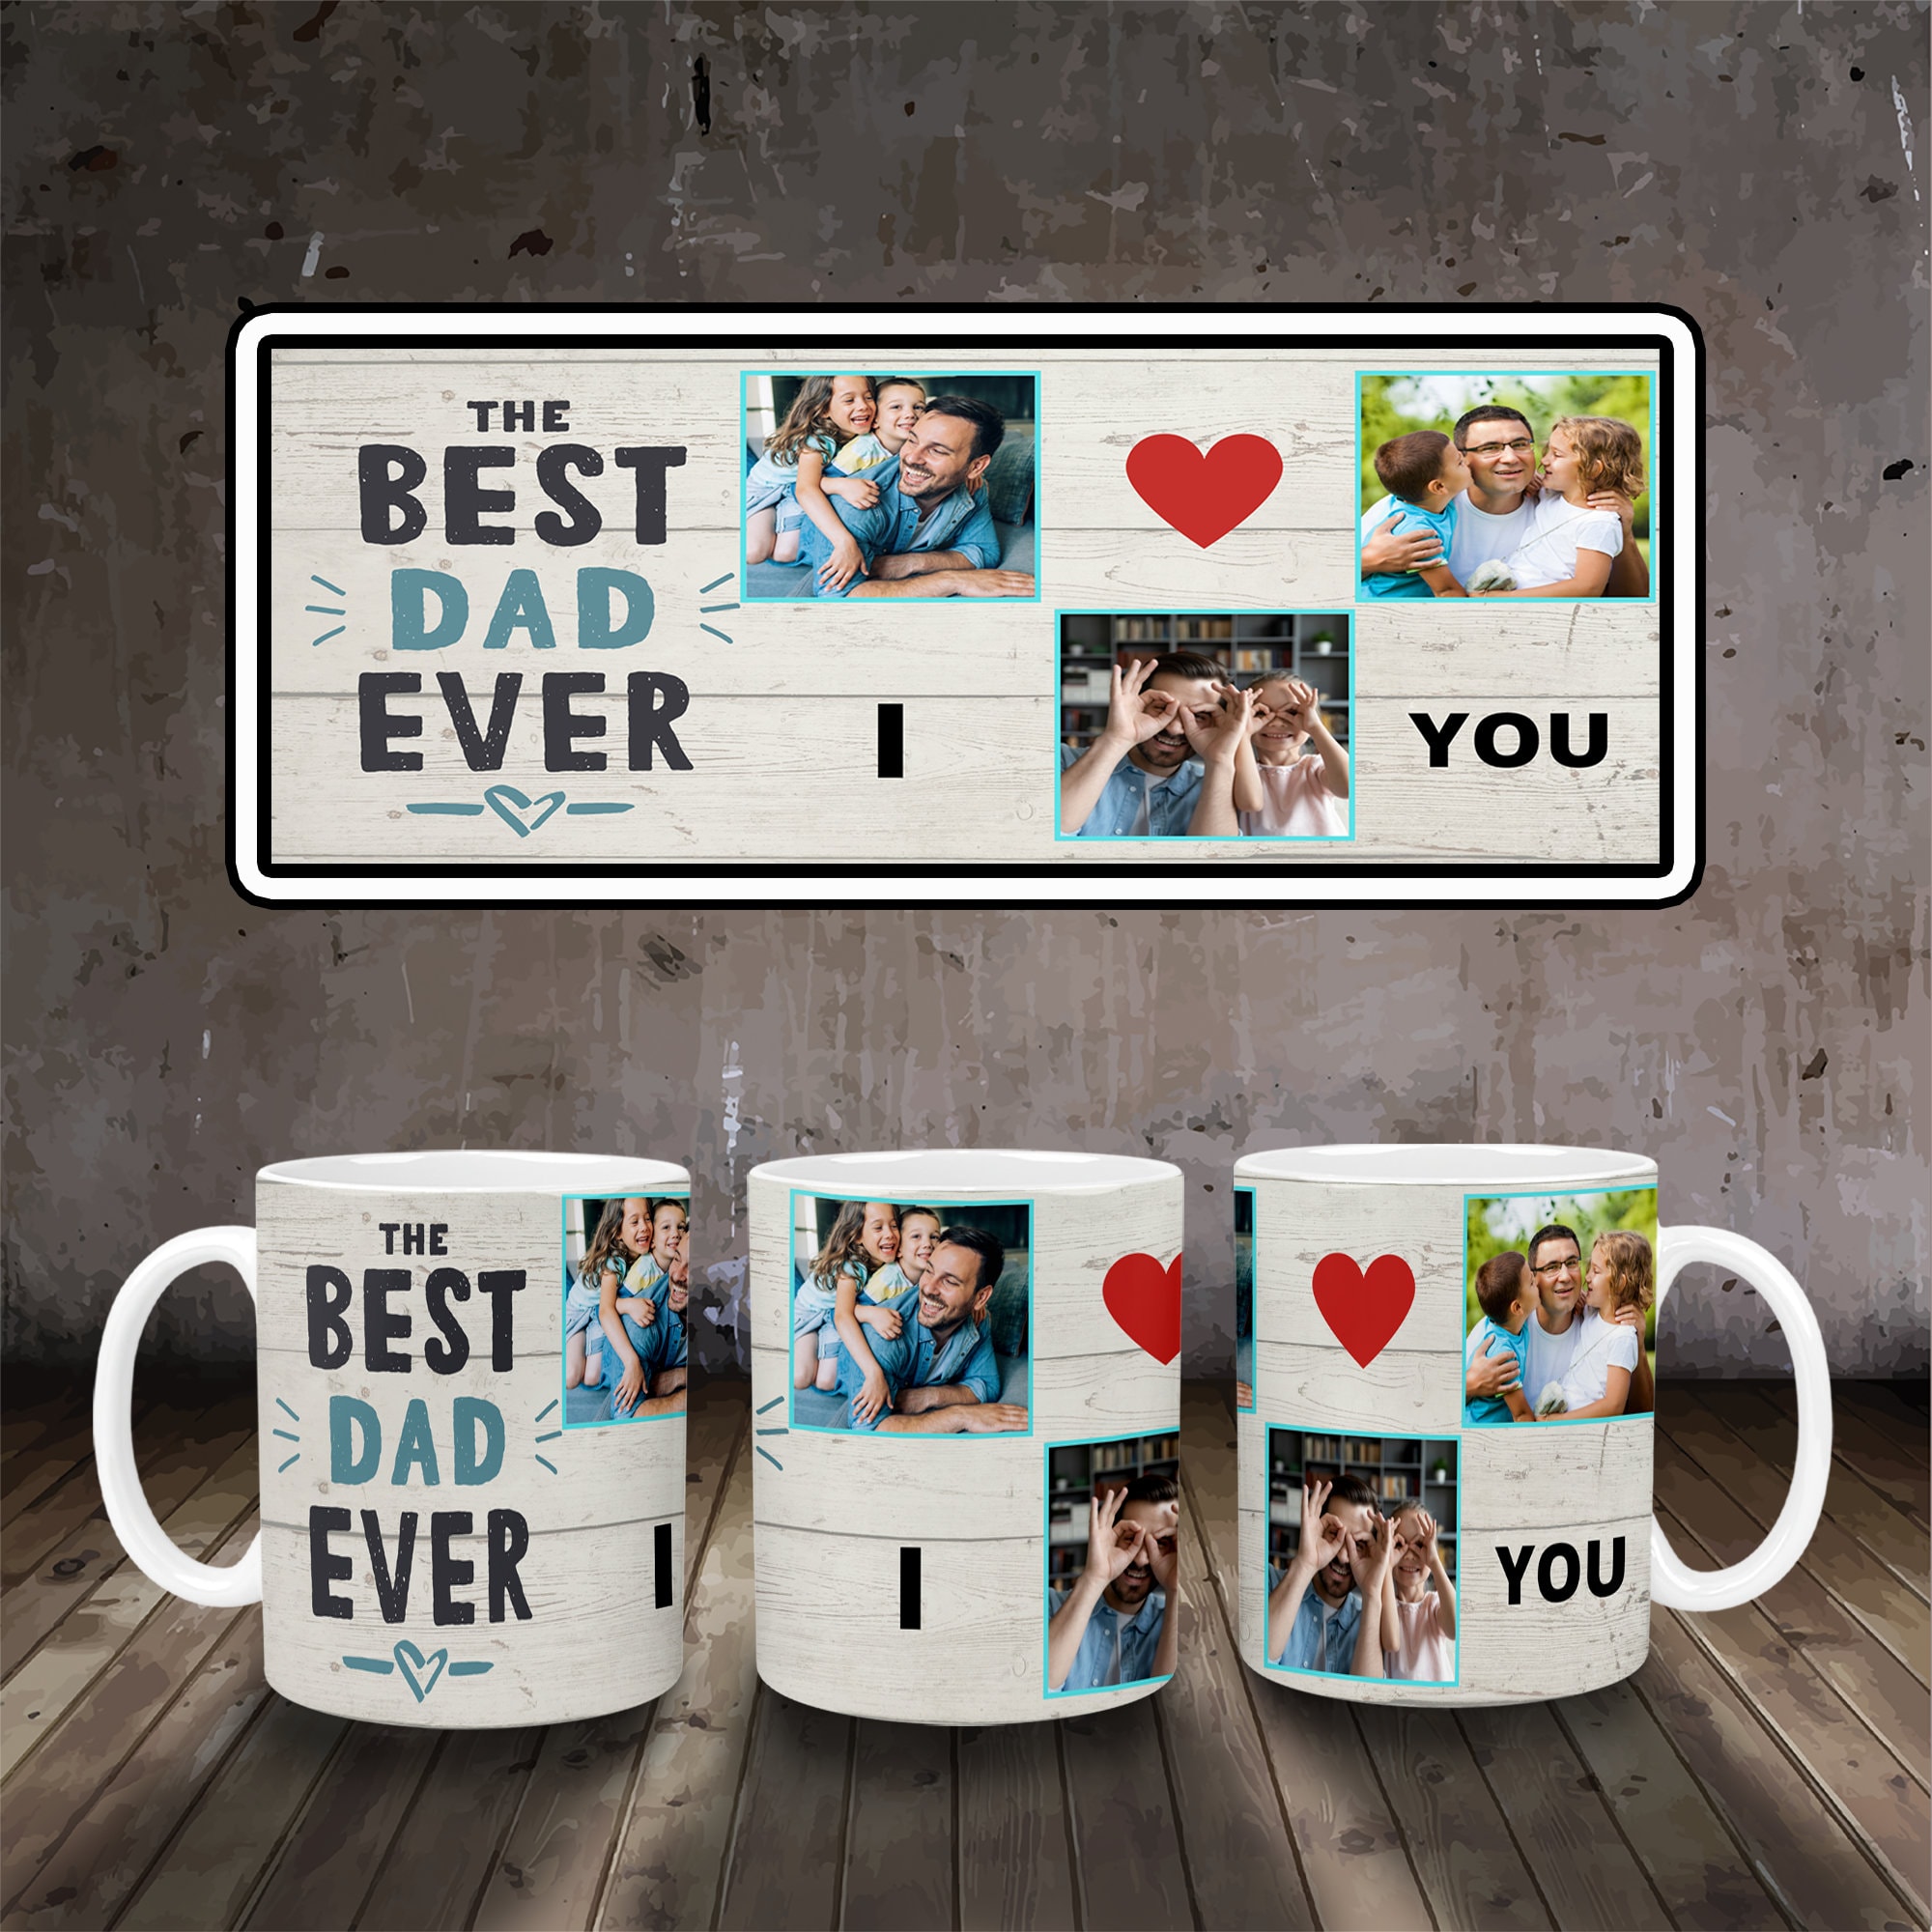 15 Oz Mug Sublimation Design, Tool Box, Mechanic, Mug Wrap, Sublimation  Template, Father's Day, Gifts for Men, Toolkit, PNG. (Download Now) 